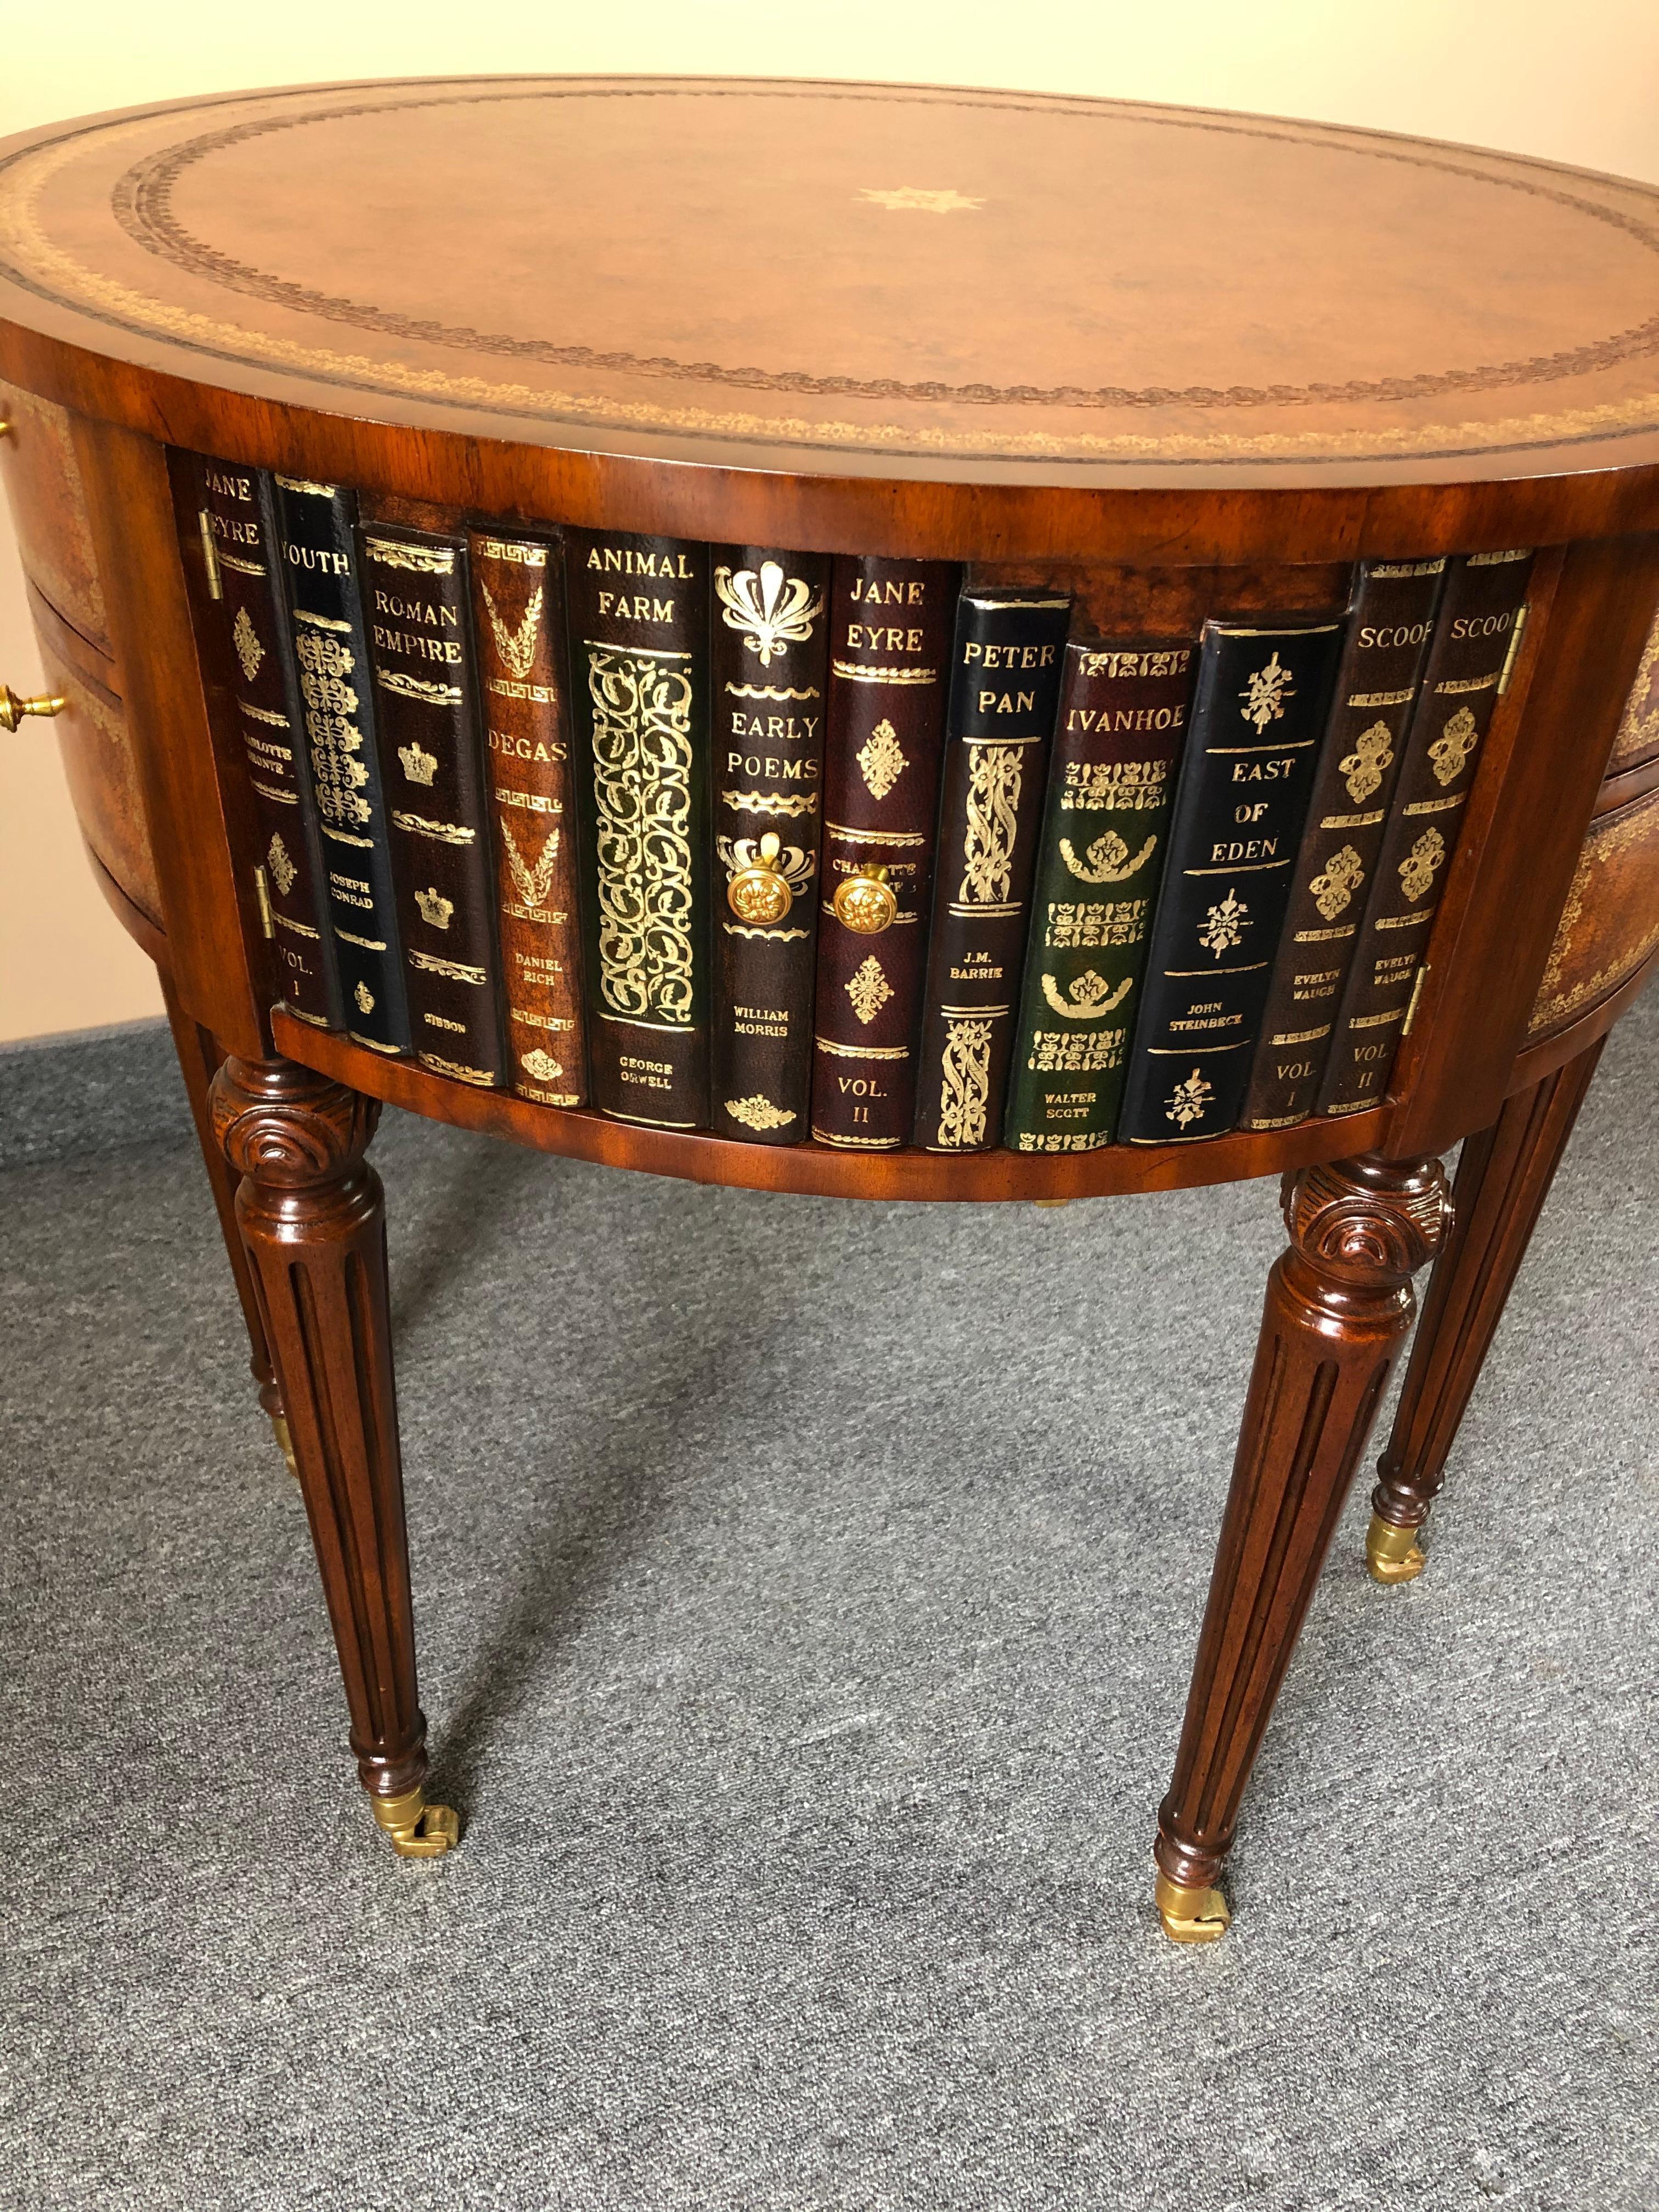 Stylish round side or end table having tooled leather top and trompe l'oeil leather books around the body with 6 drawers in total and 3 doors that open to reveal storage inside.
Tapered carved mahogany legs terminate in brass casters.